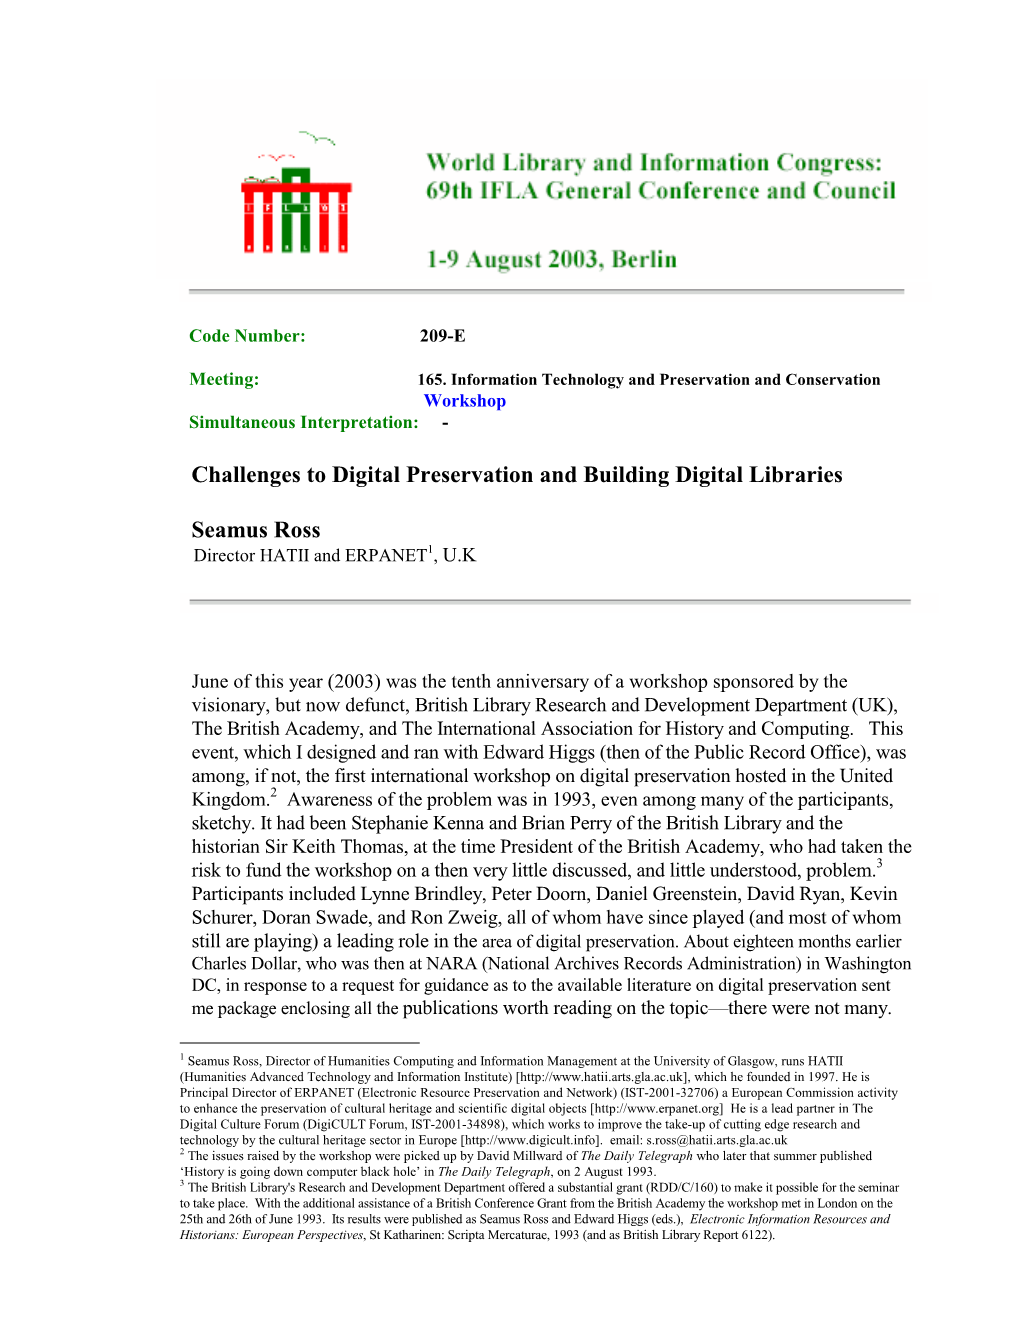 Challenges to Digital Preservation and Building the Digital Library